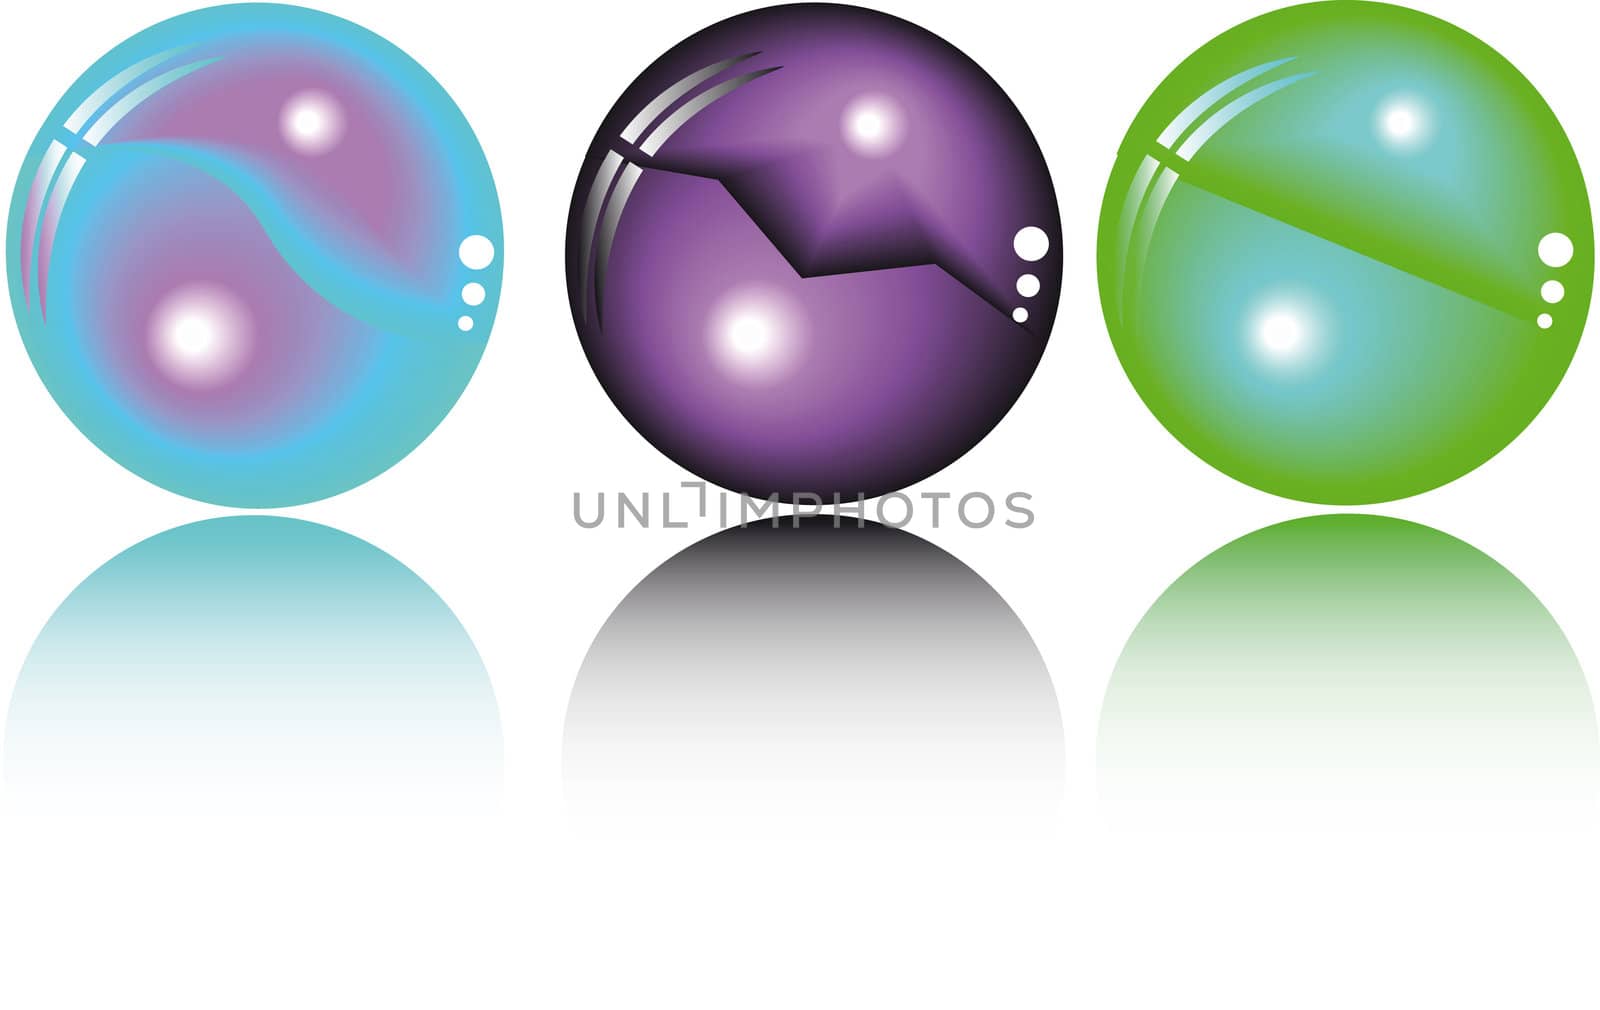 three fantasy spheres in different colors
